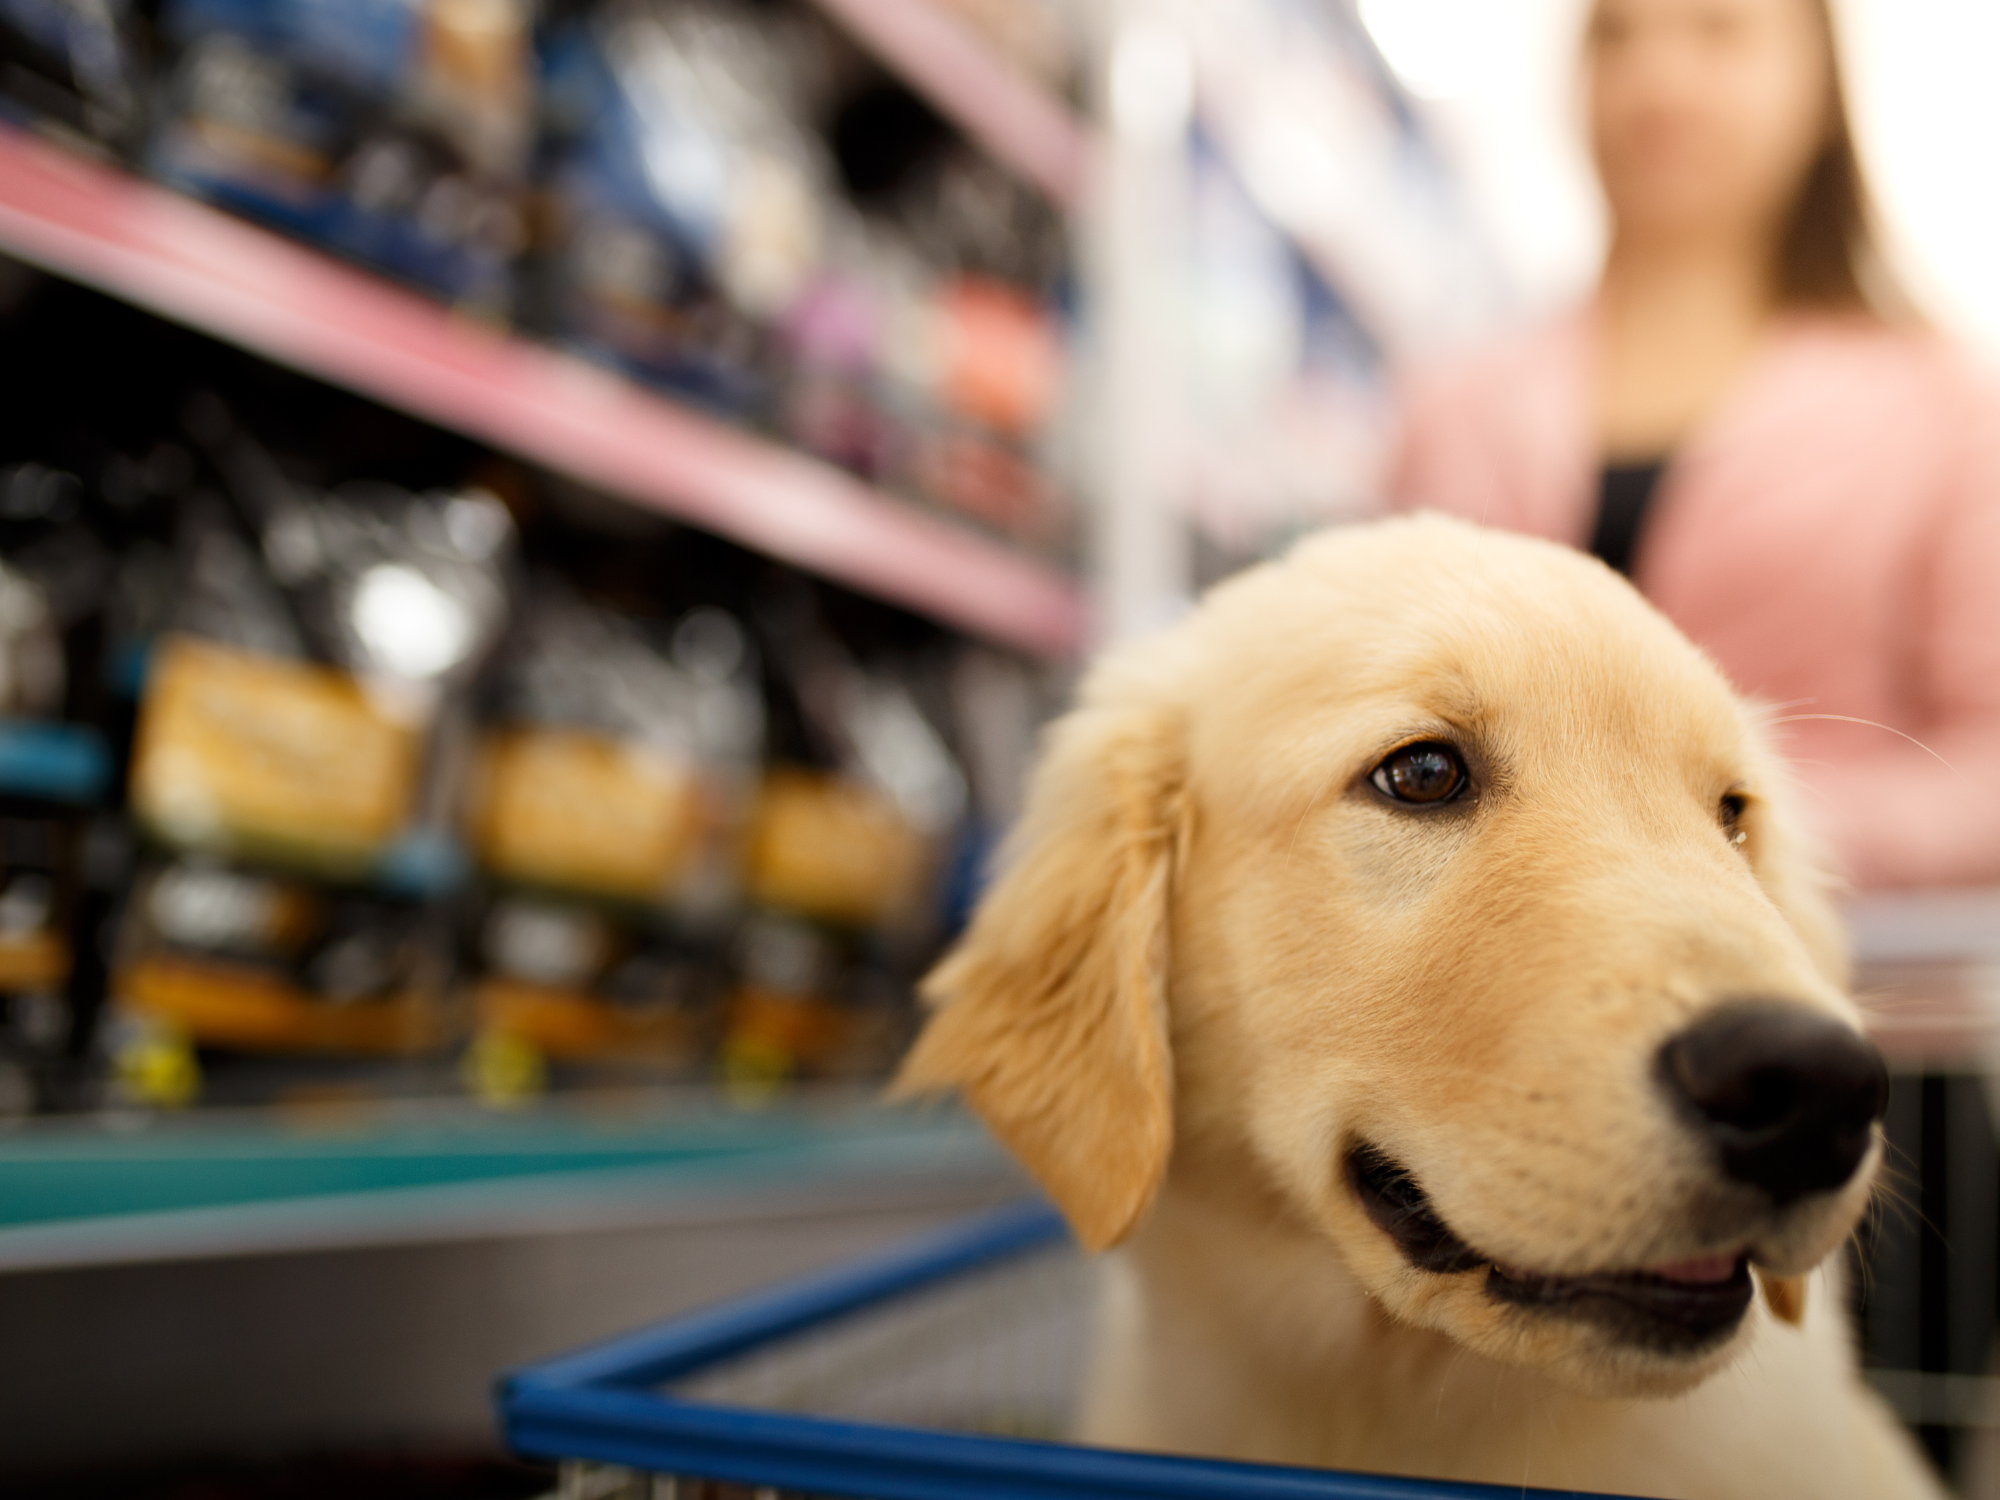 A dog in a cart with its owner shopping for pet products